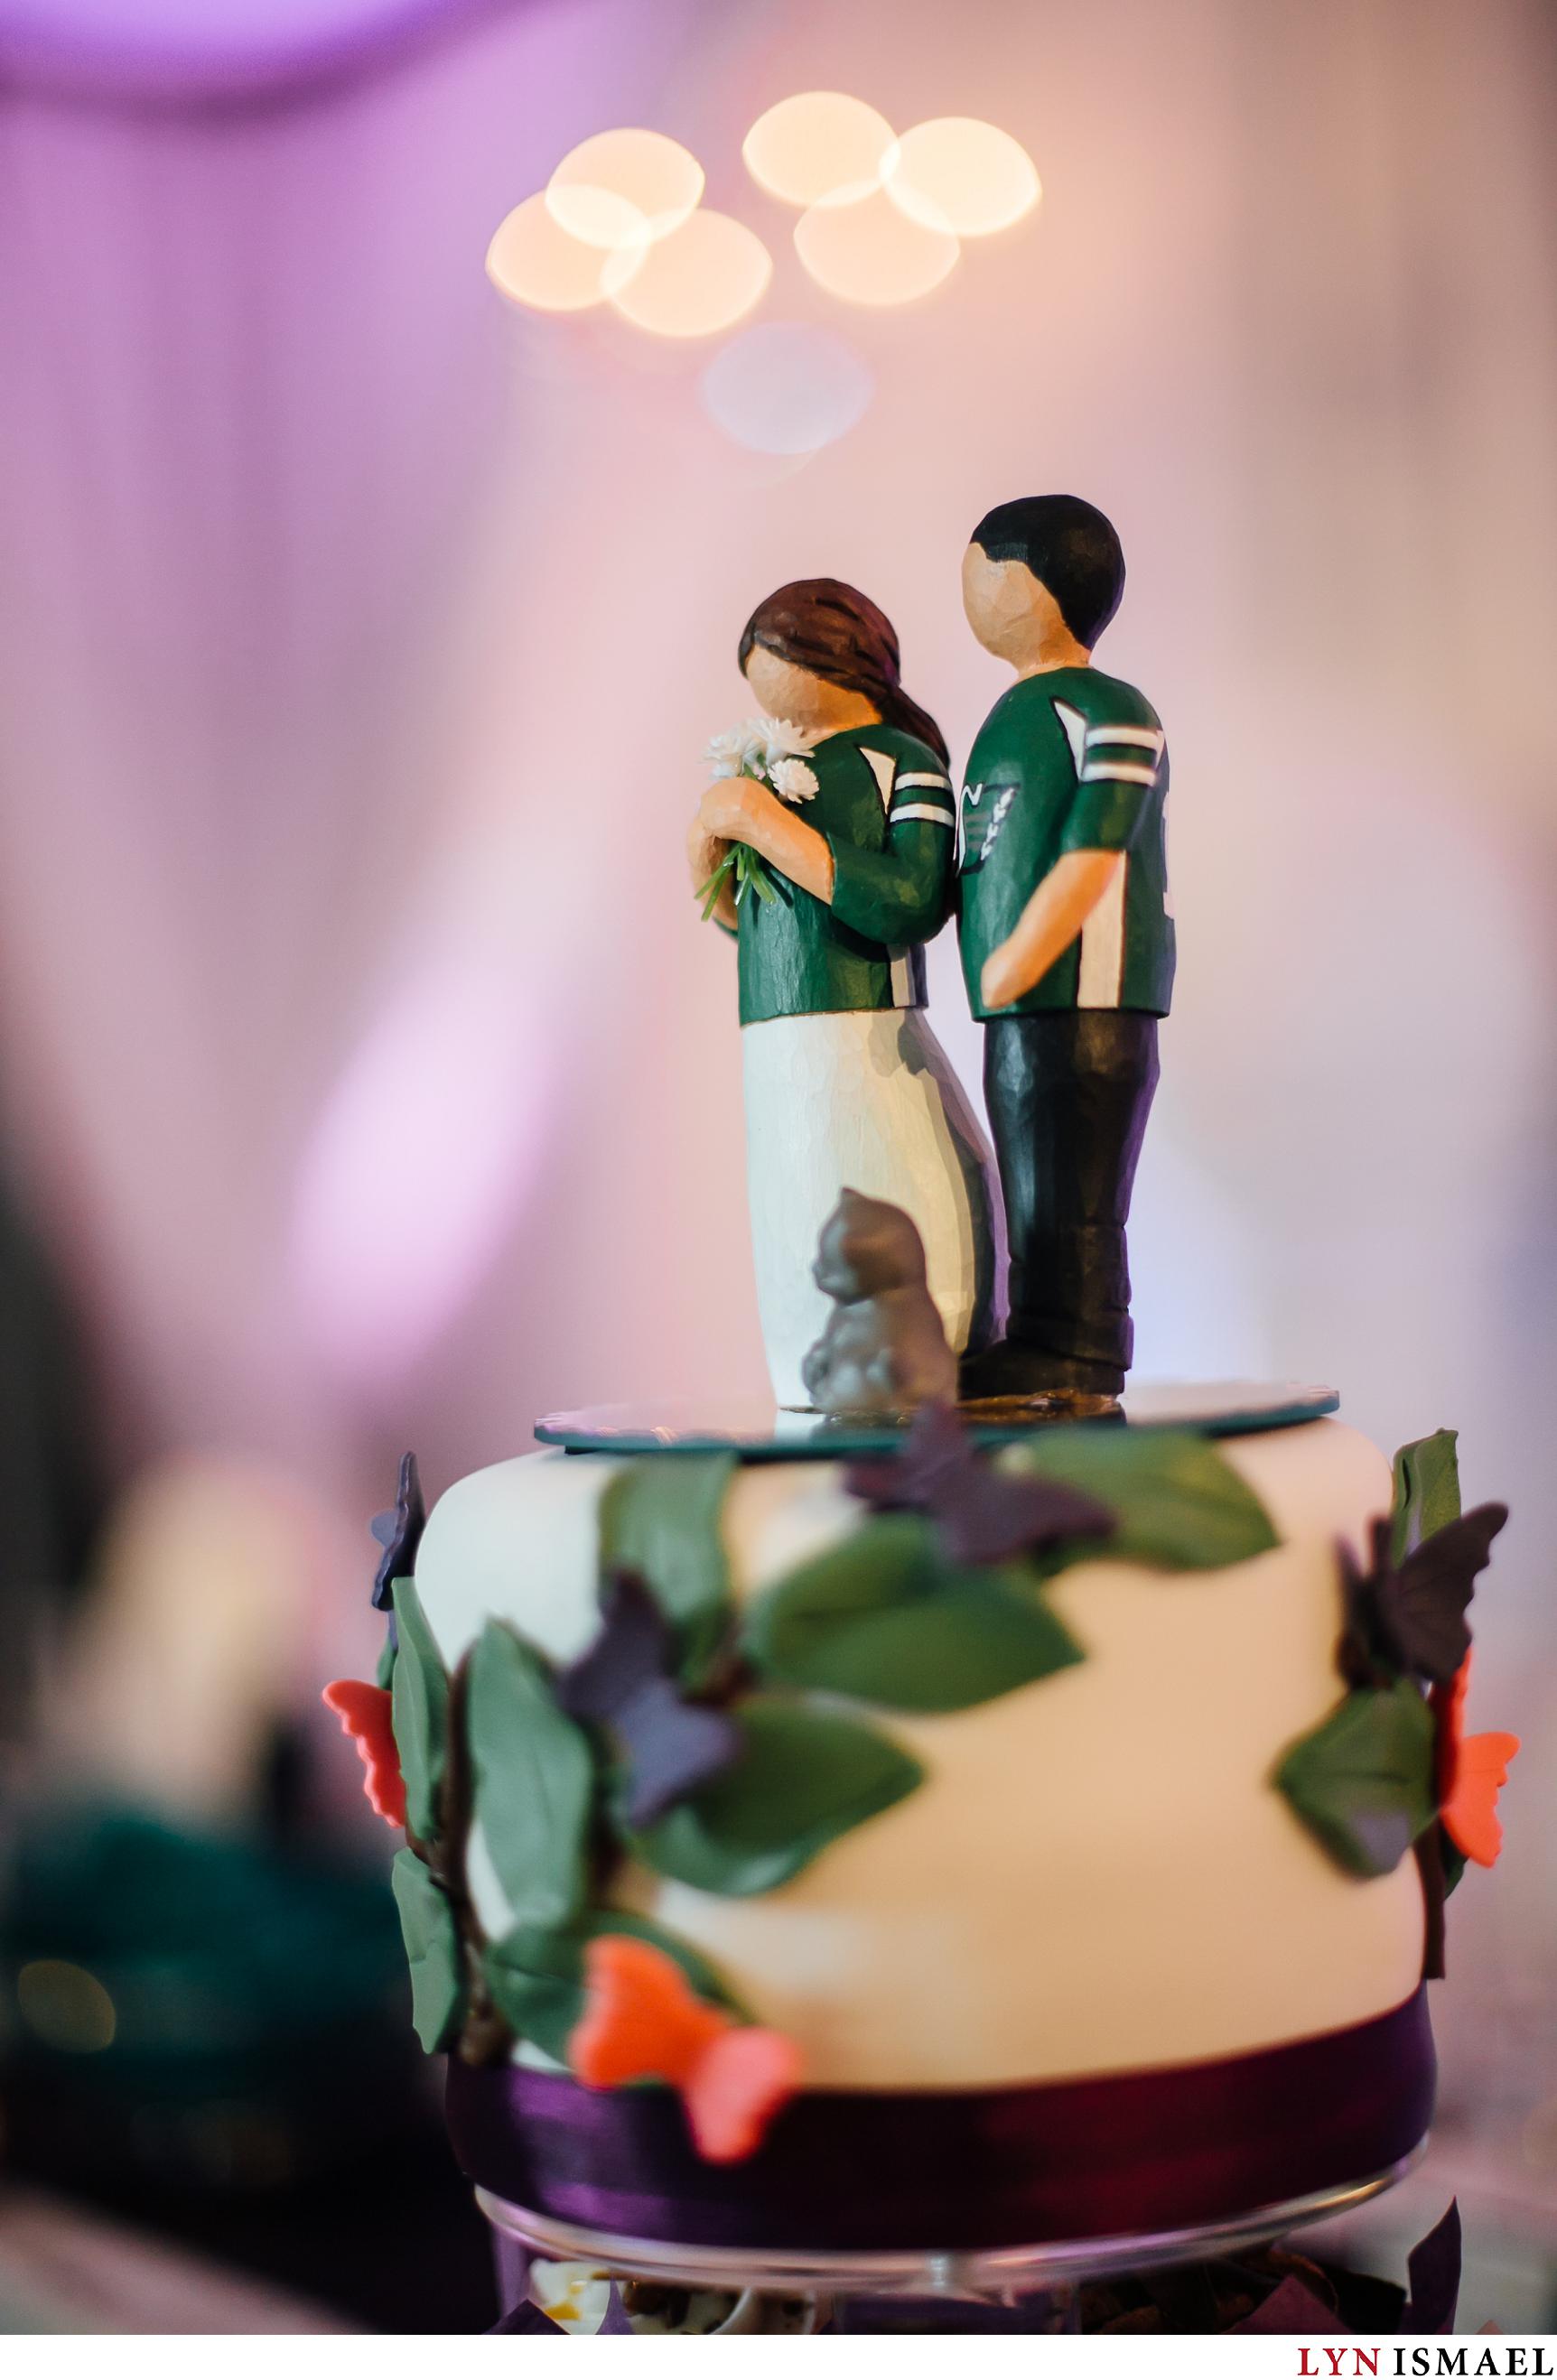 Cake topper featuring a bride and groom wearing Roughriders jersey